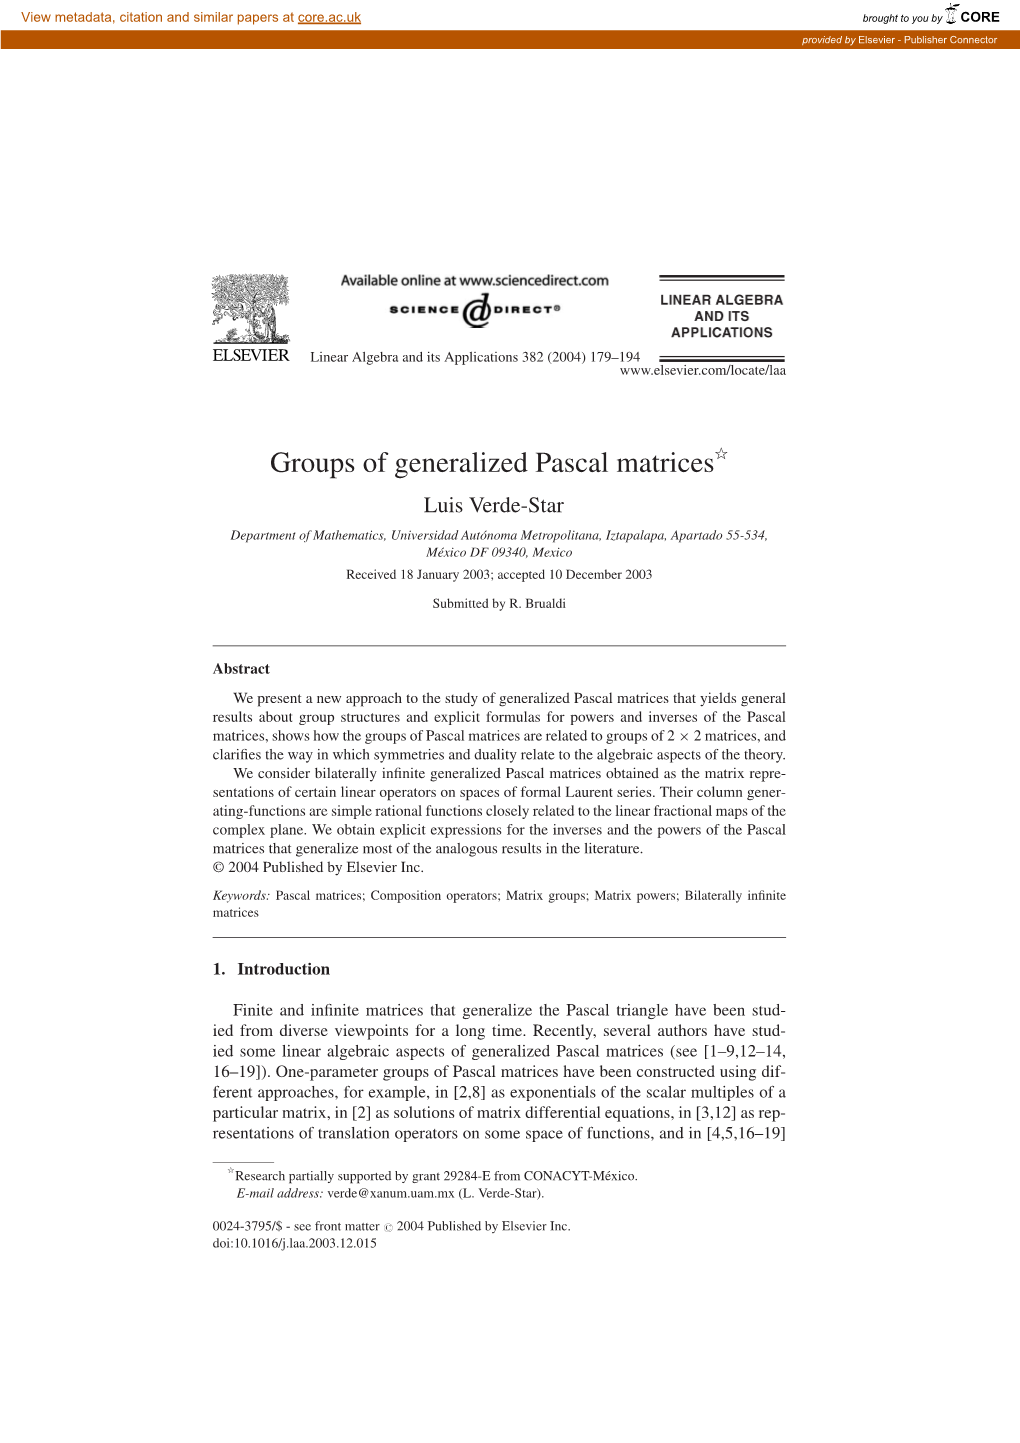 Groups of Generalized Pascal Matrices